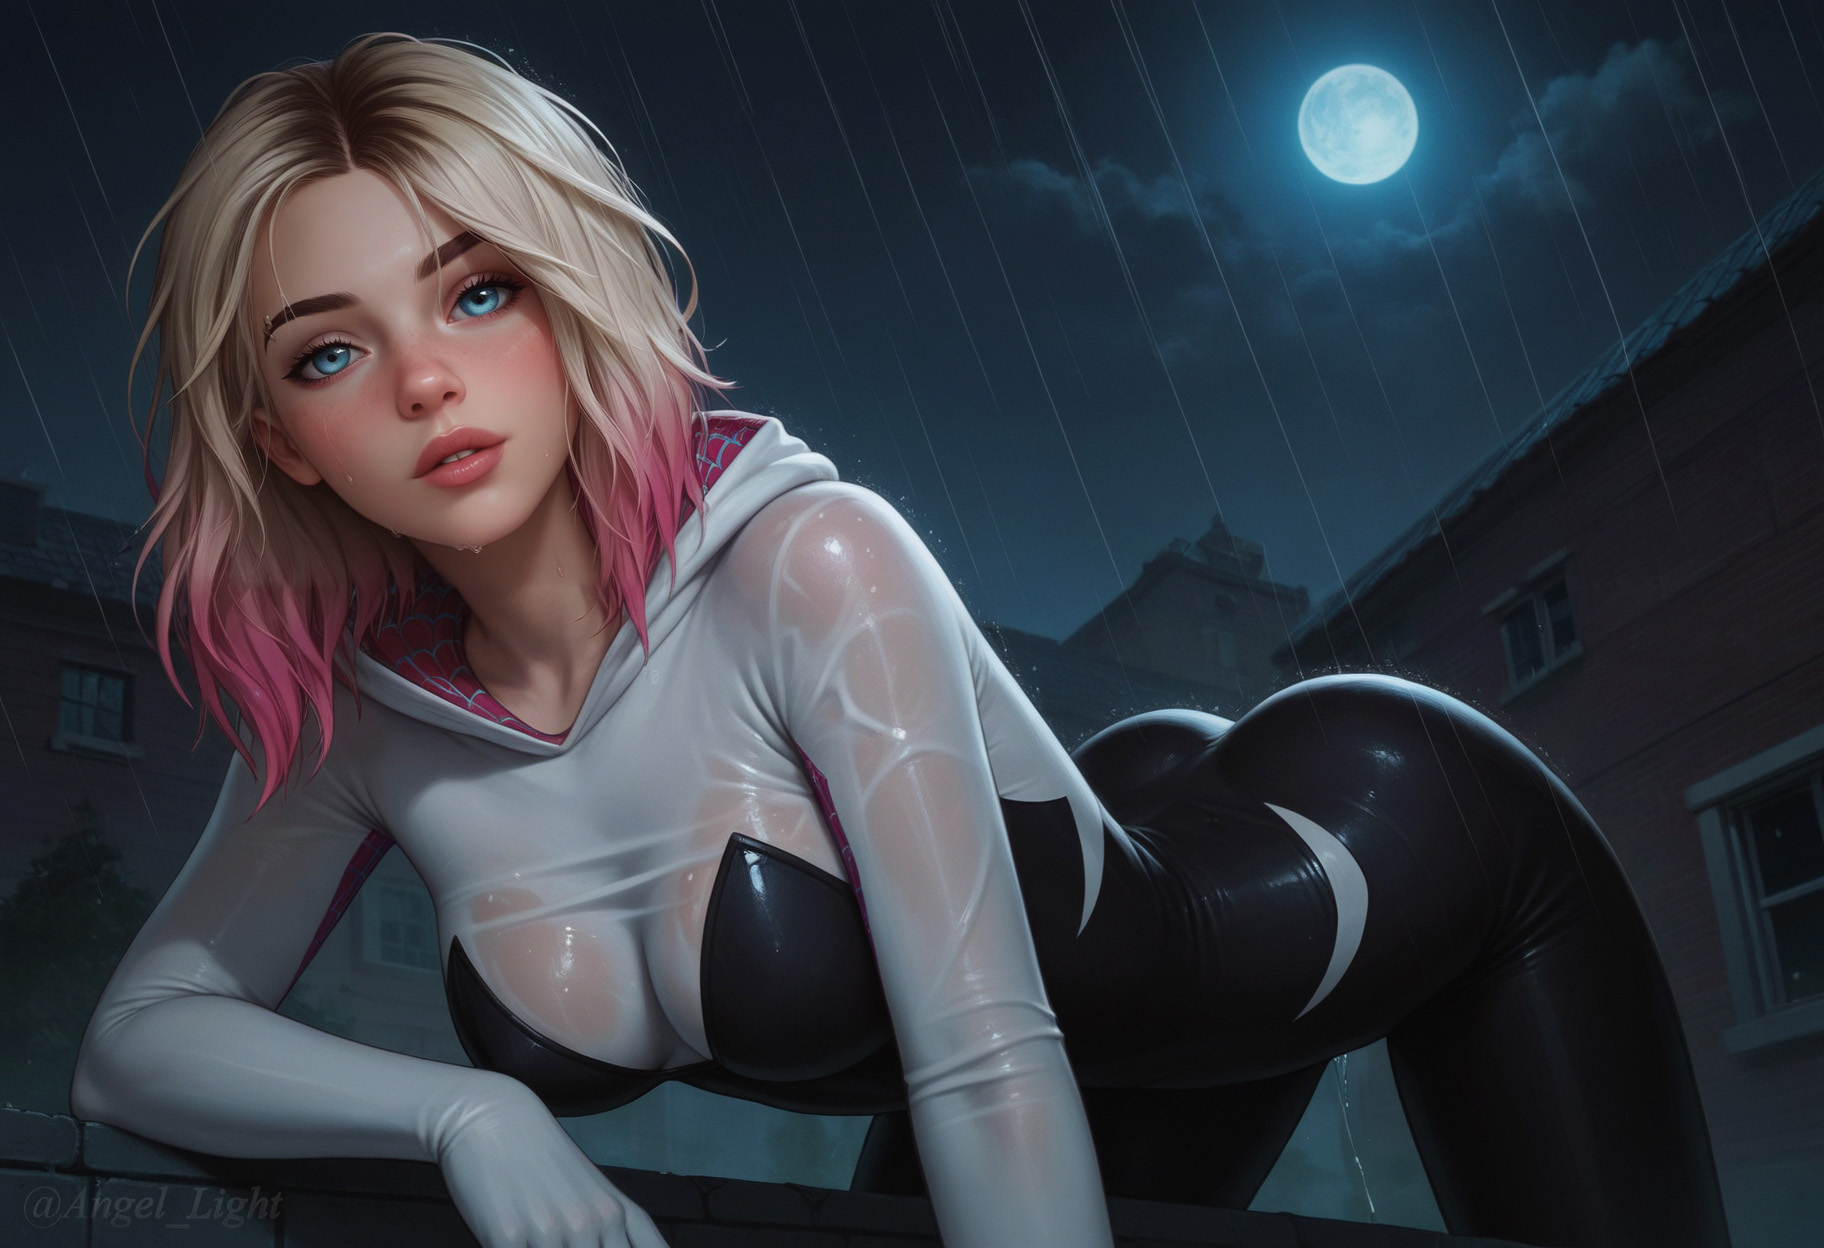 General 1824x1248 Stable Diffusion AI art Gwen Stacy blue eyes dyed hair Moon wet clothing Spider Gwen